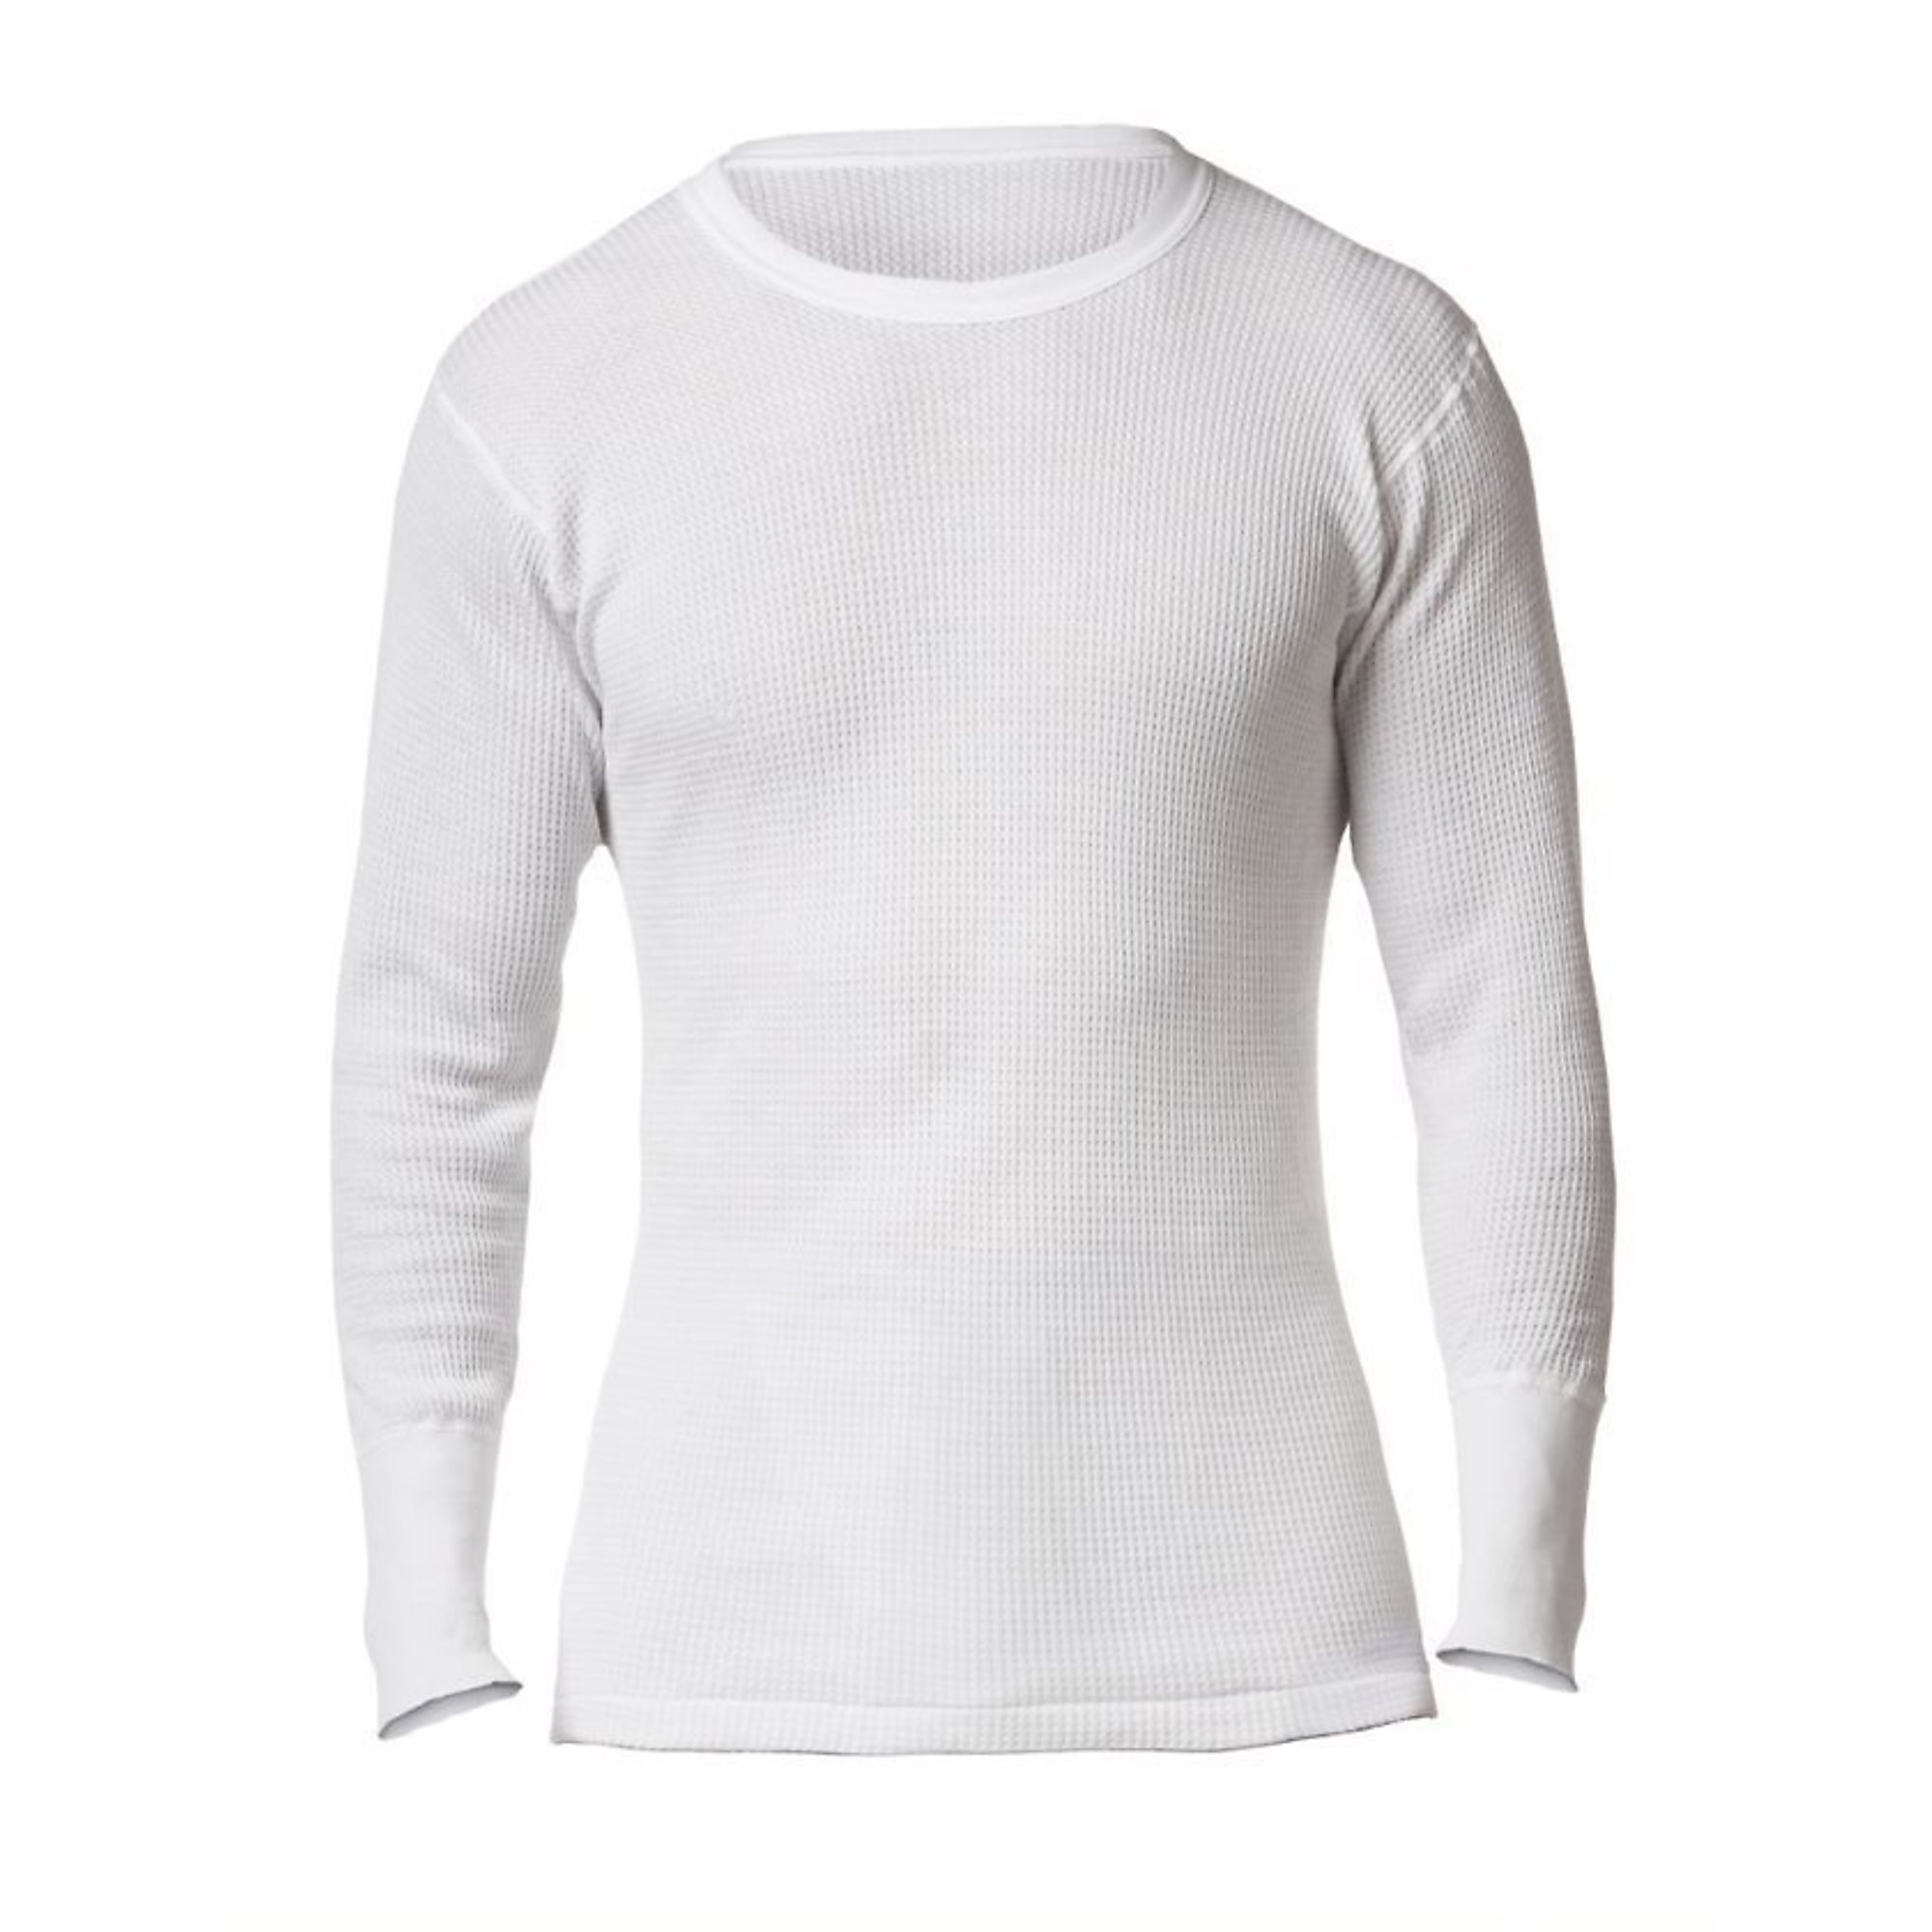 Stanfield's Undershirt Waffle Knit Henley. Long Sleeve in Grey or Indigo